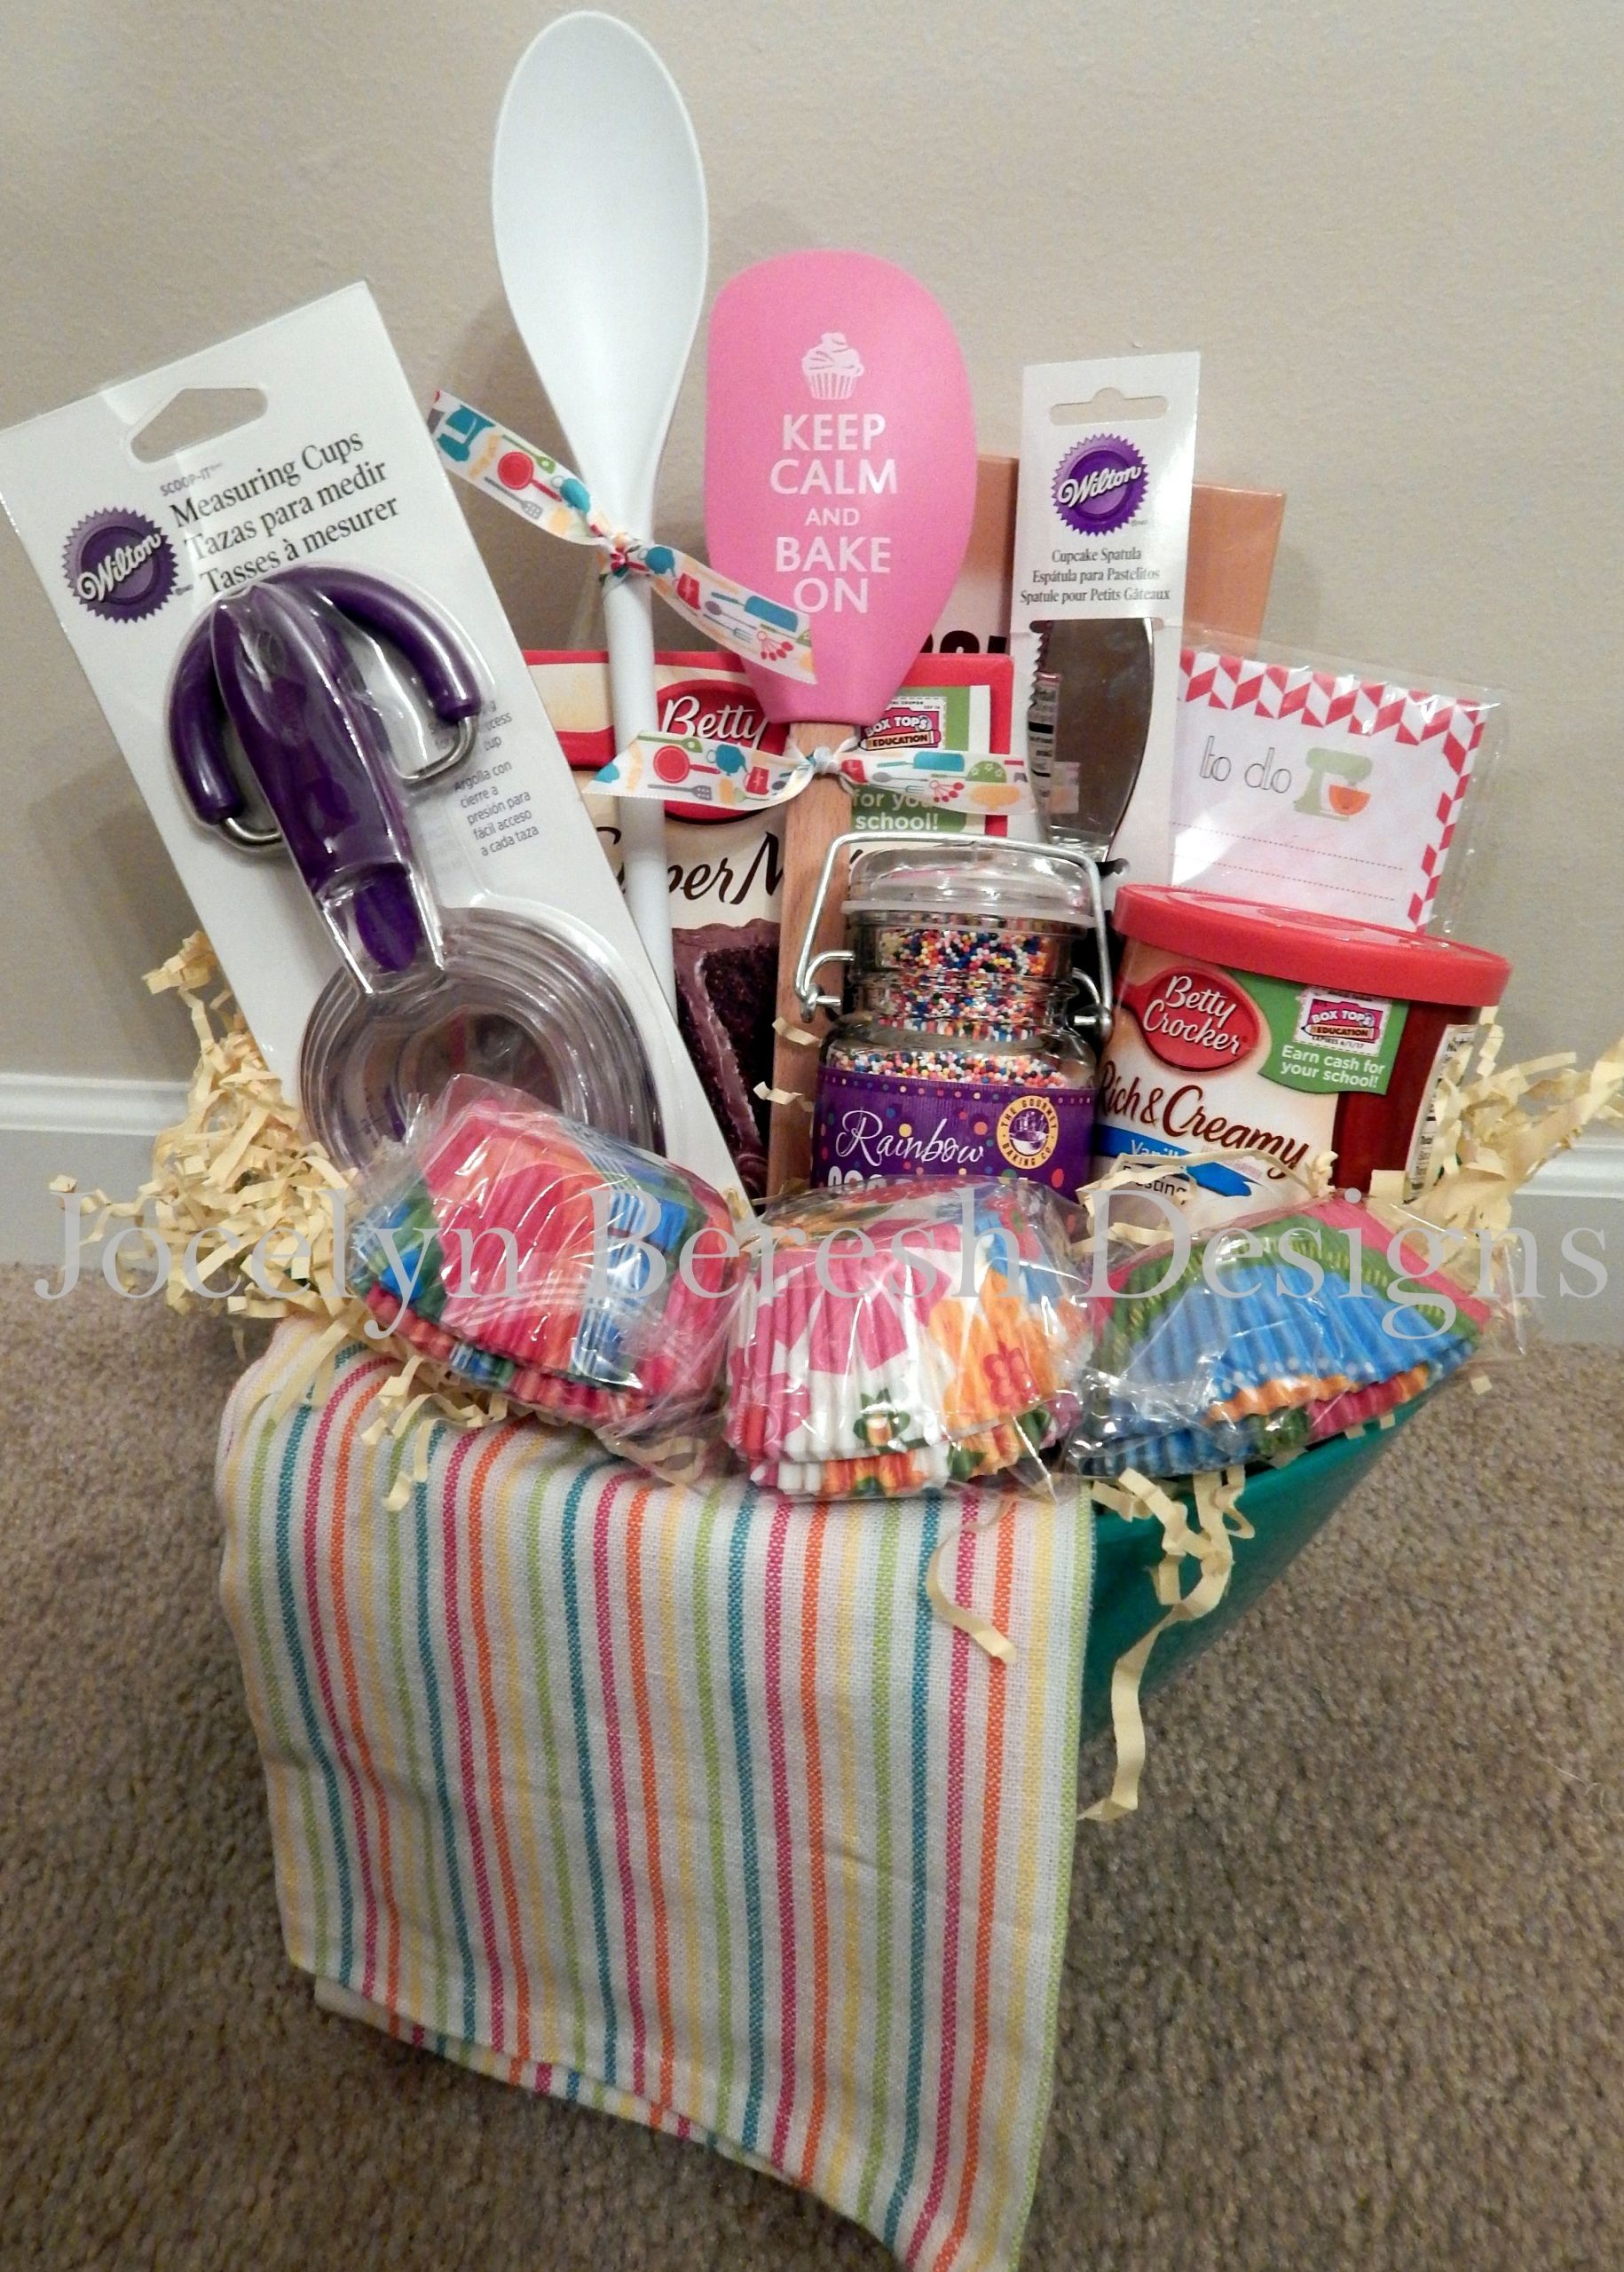 Ideas For Gift Baskets To Auction
 10 Cute Silent Auction Gift Basket Ideas 2019